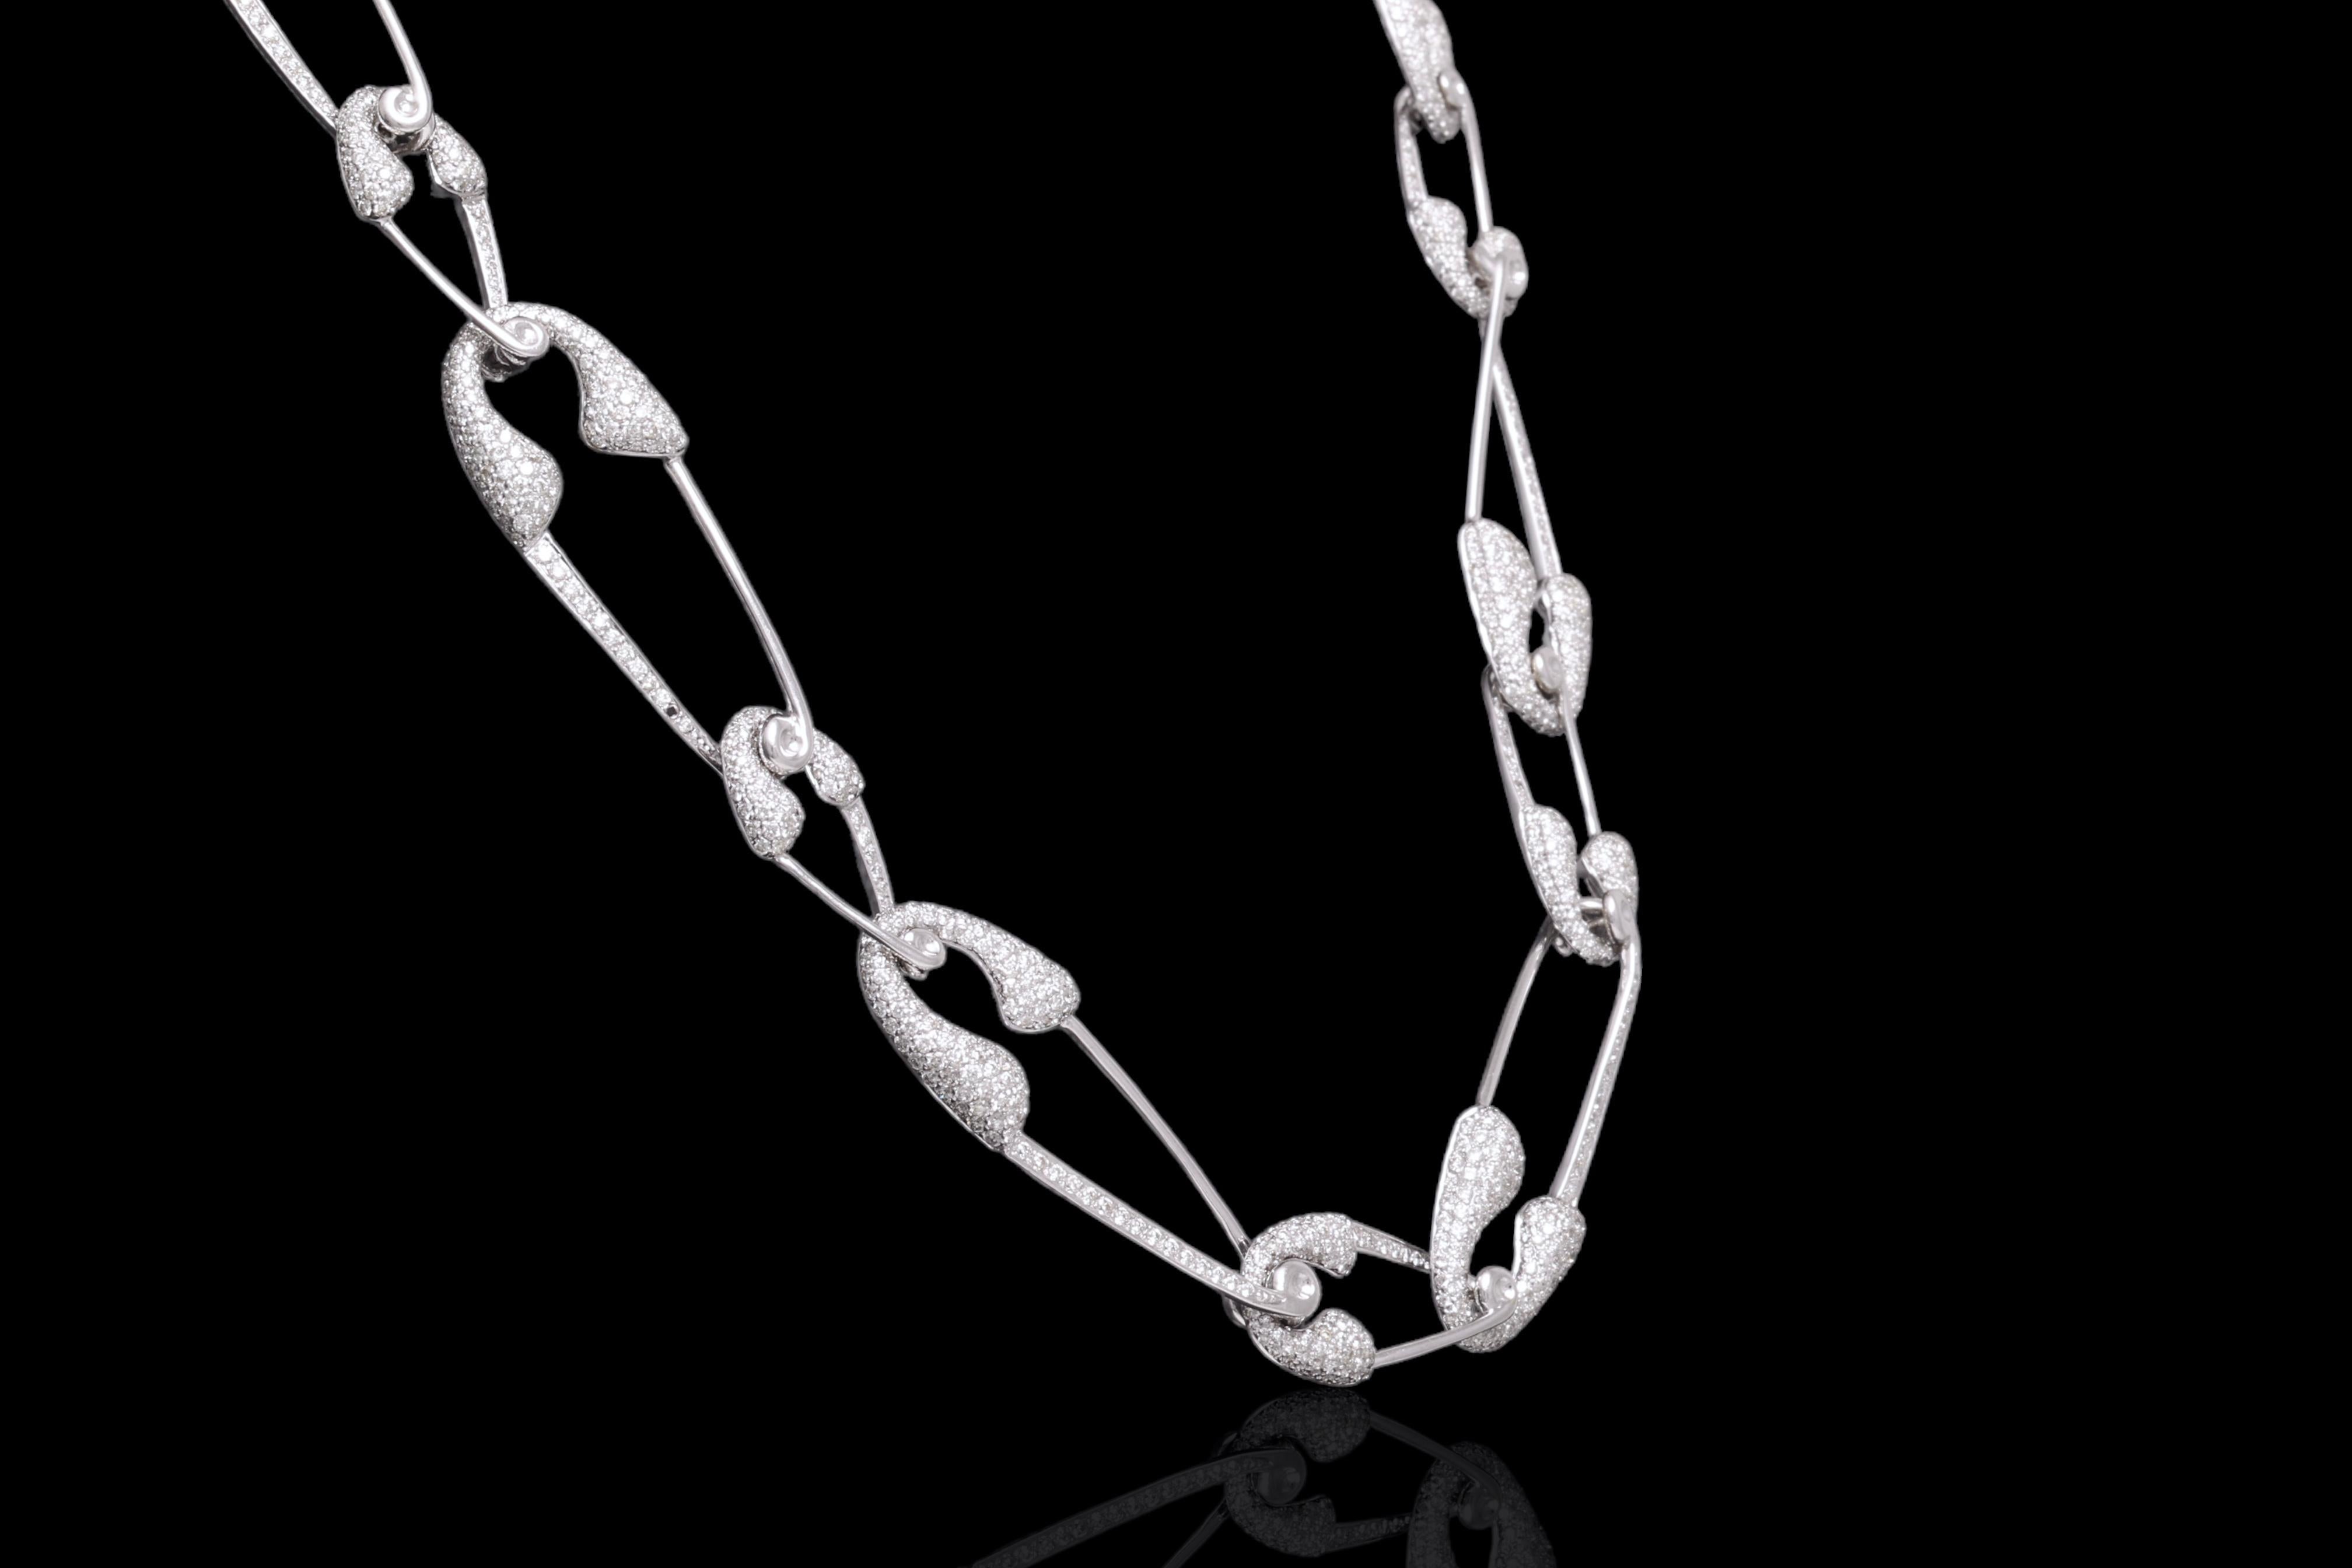 Brilliant Cut Fabulous 18 kt. White Gold Interlocking Safety Pin Necklace With 5.6ct. Diamonds For Sale